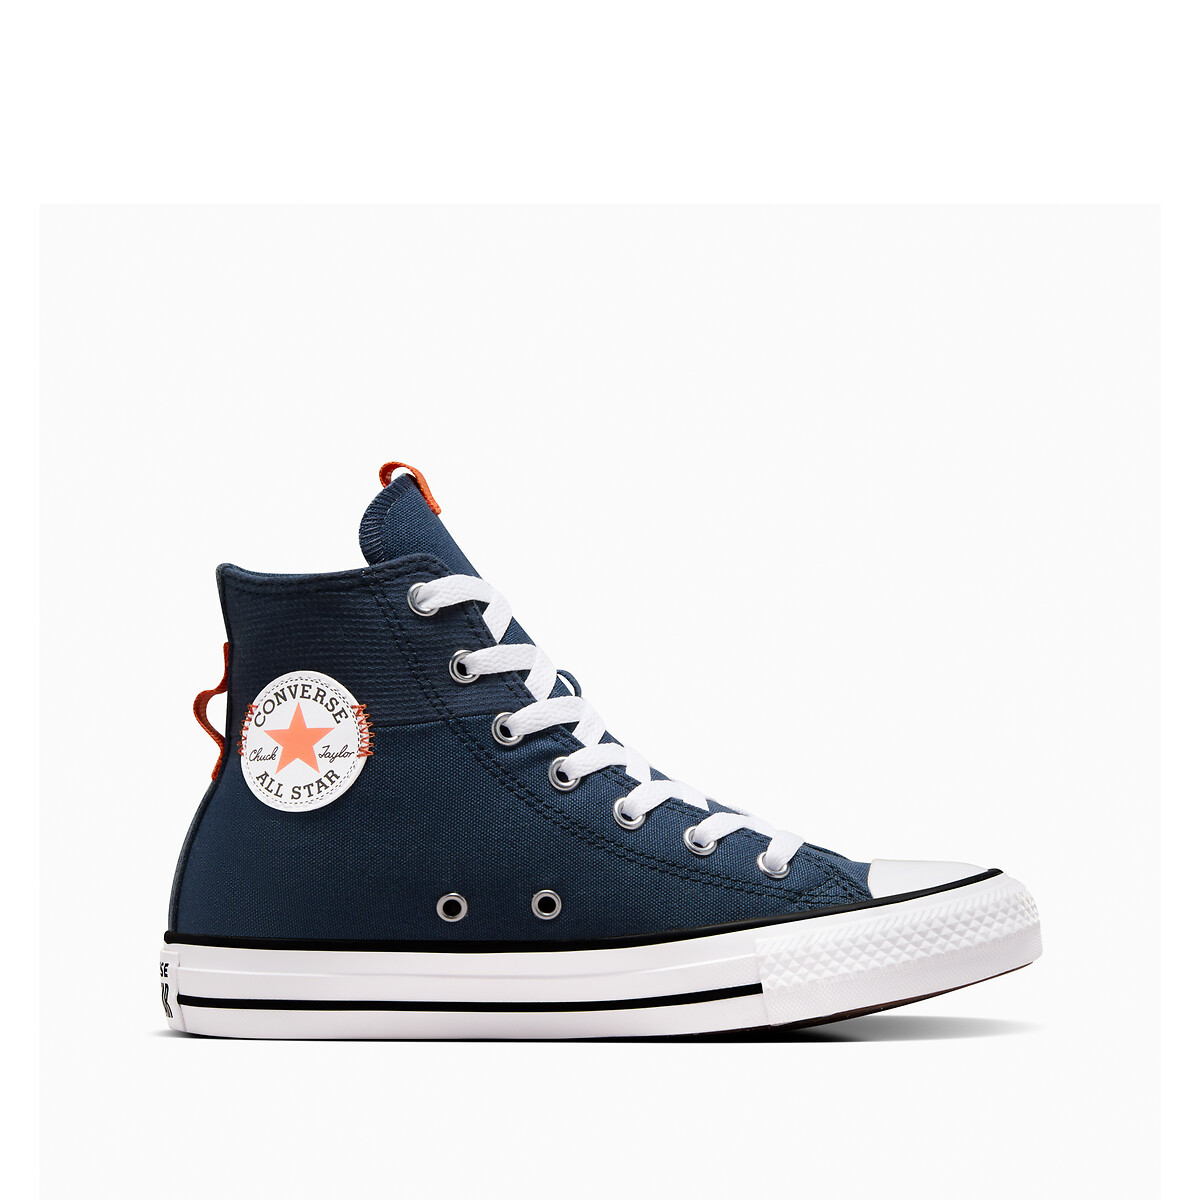 Converse Sneakers All Star Hi Day Trip Utility